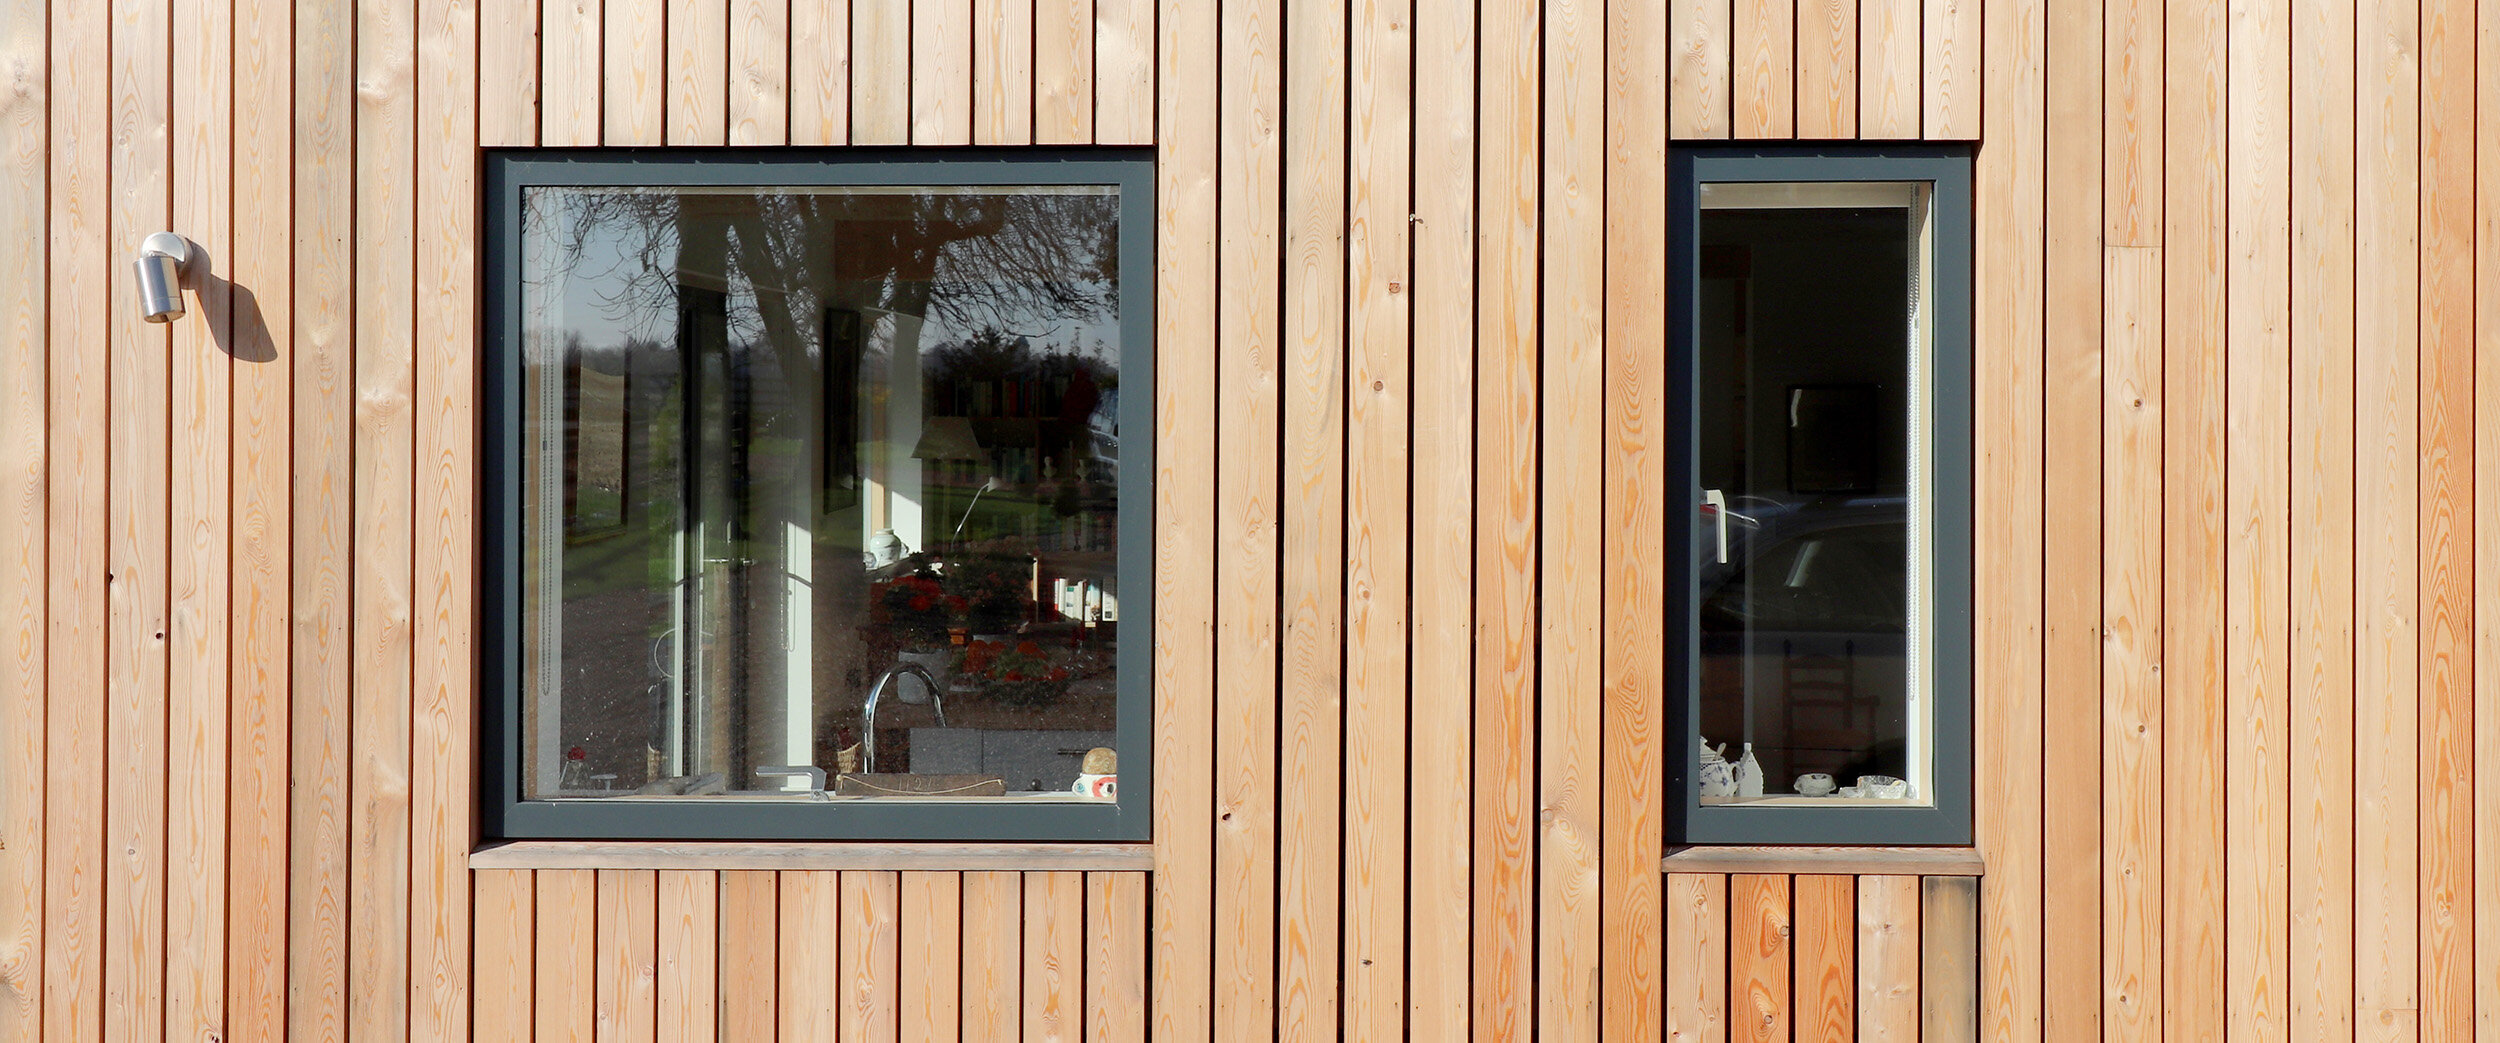 windows and doors designed to perfectly fit in with the spacing and rhythm of the vertical larch cladding